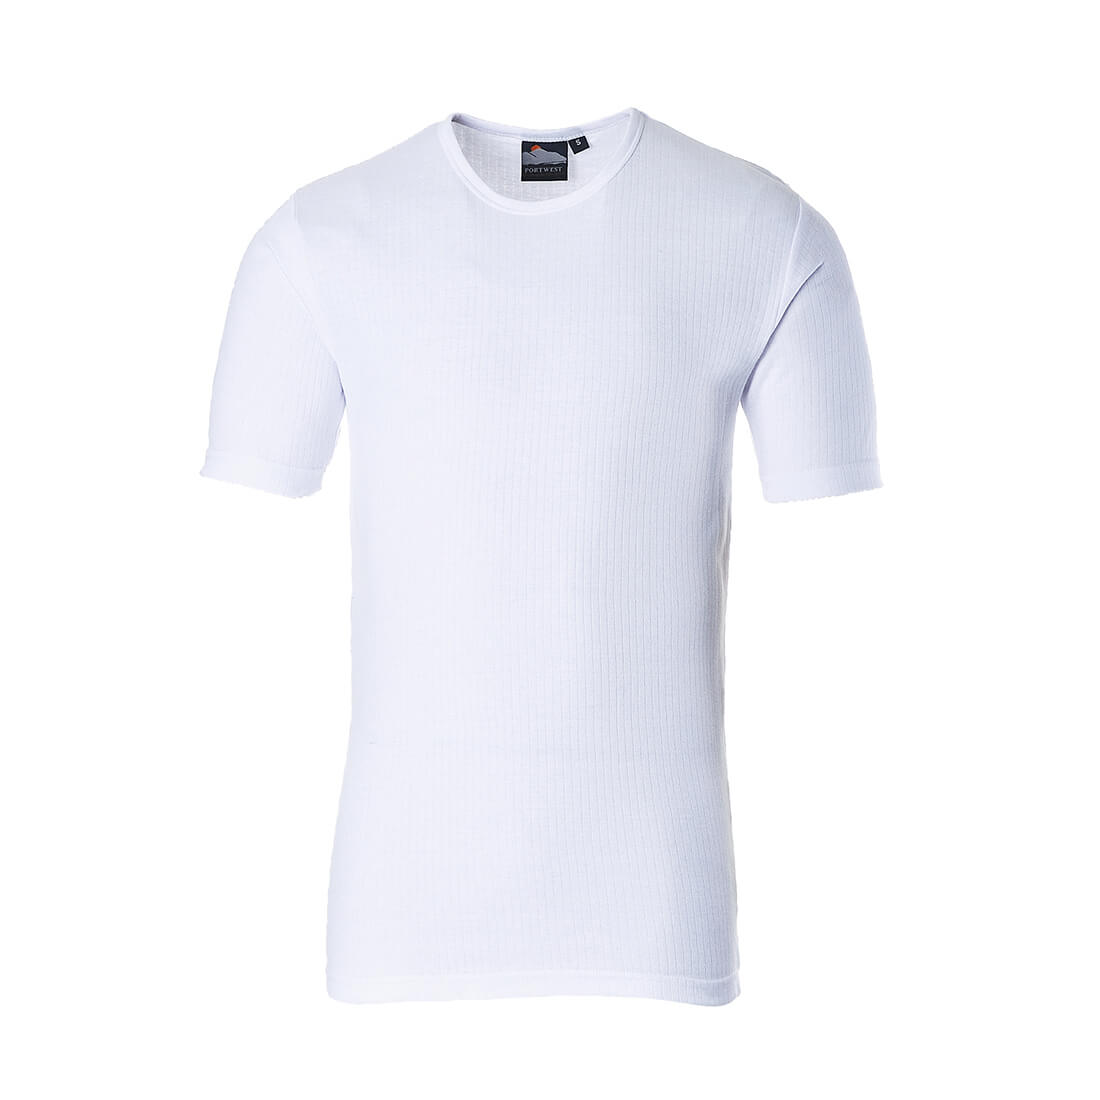 Image of Portwest Thermal Short Sleeve T Shirt White L